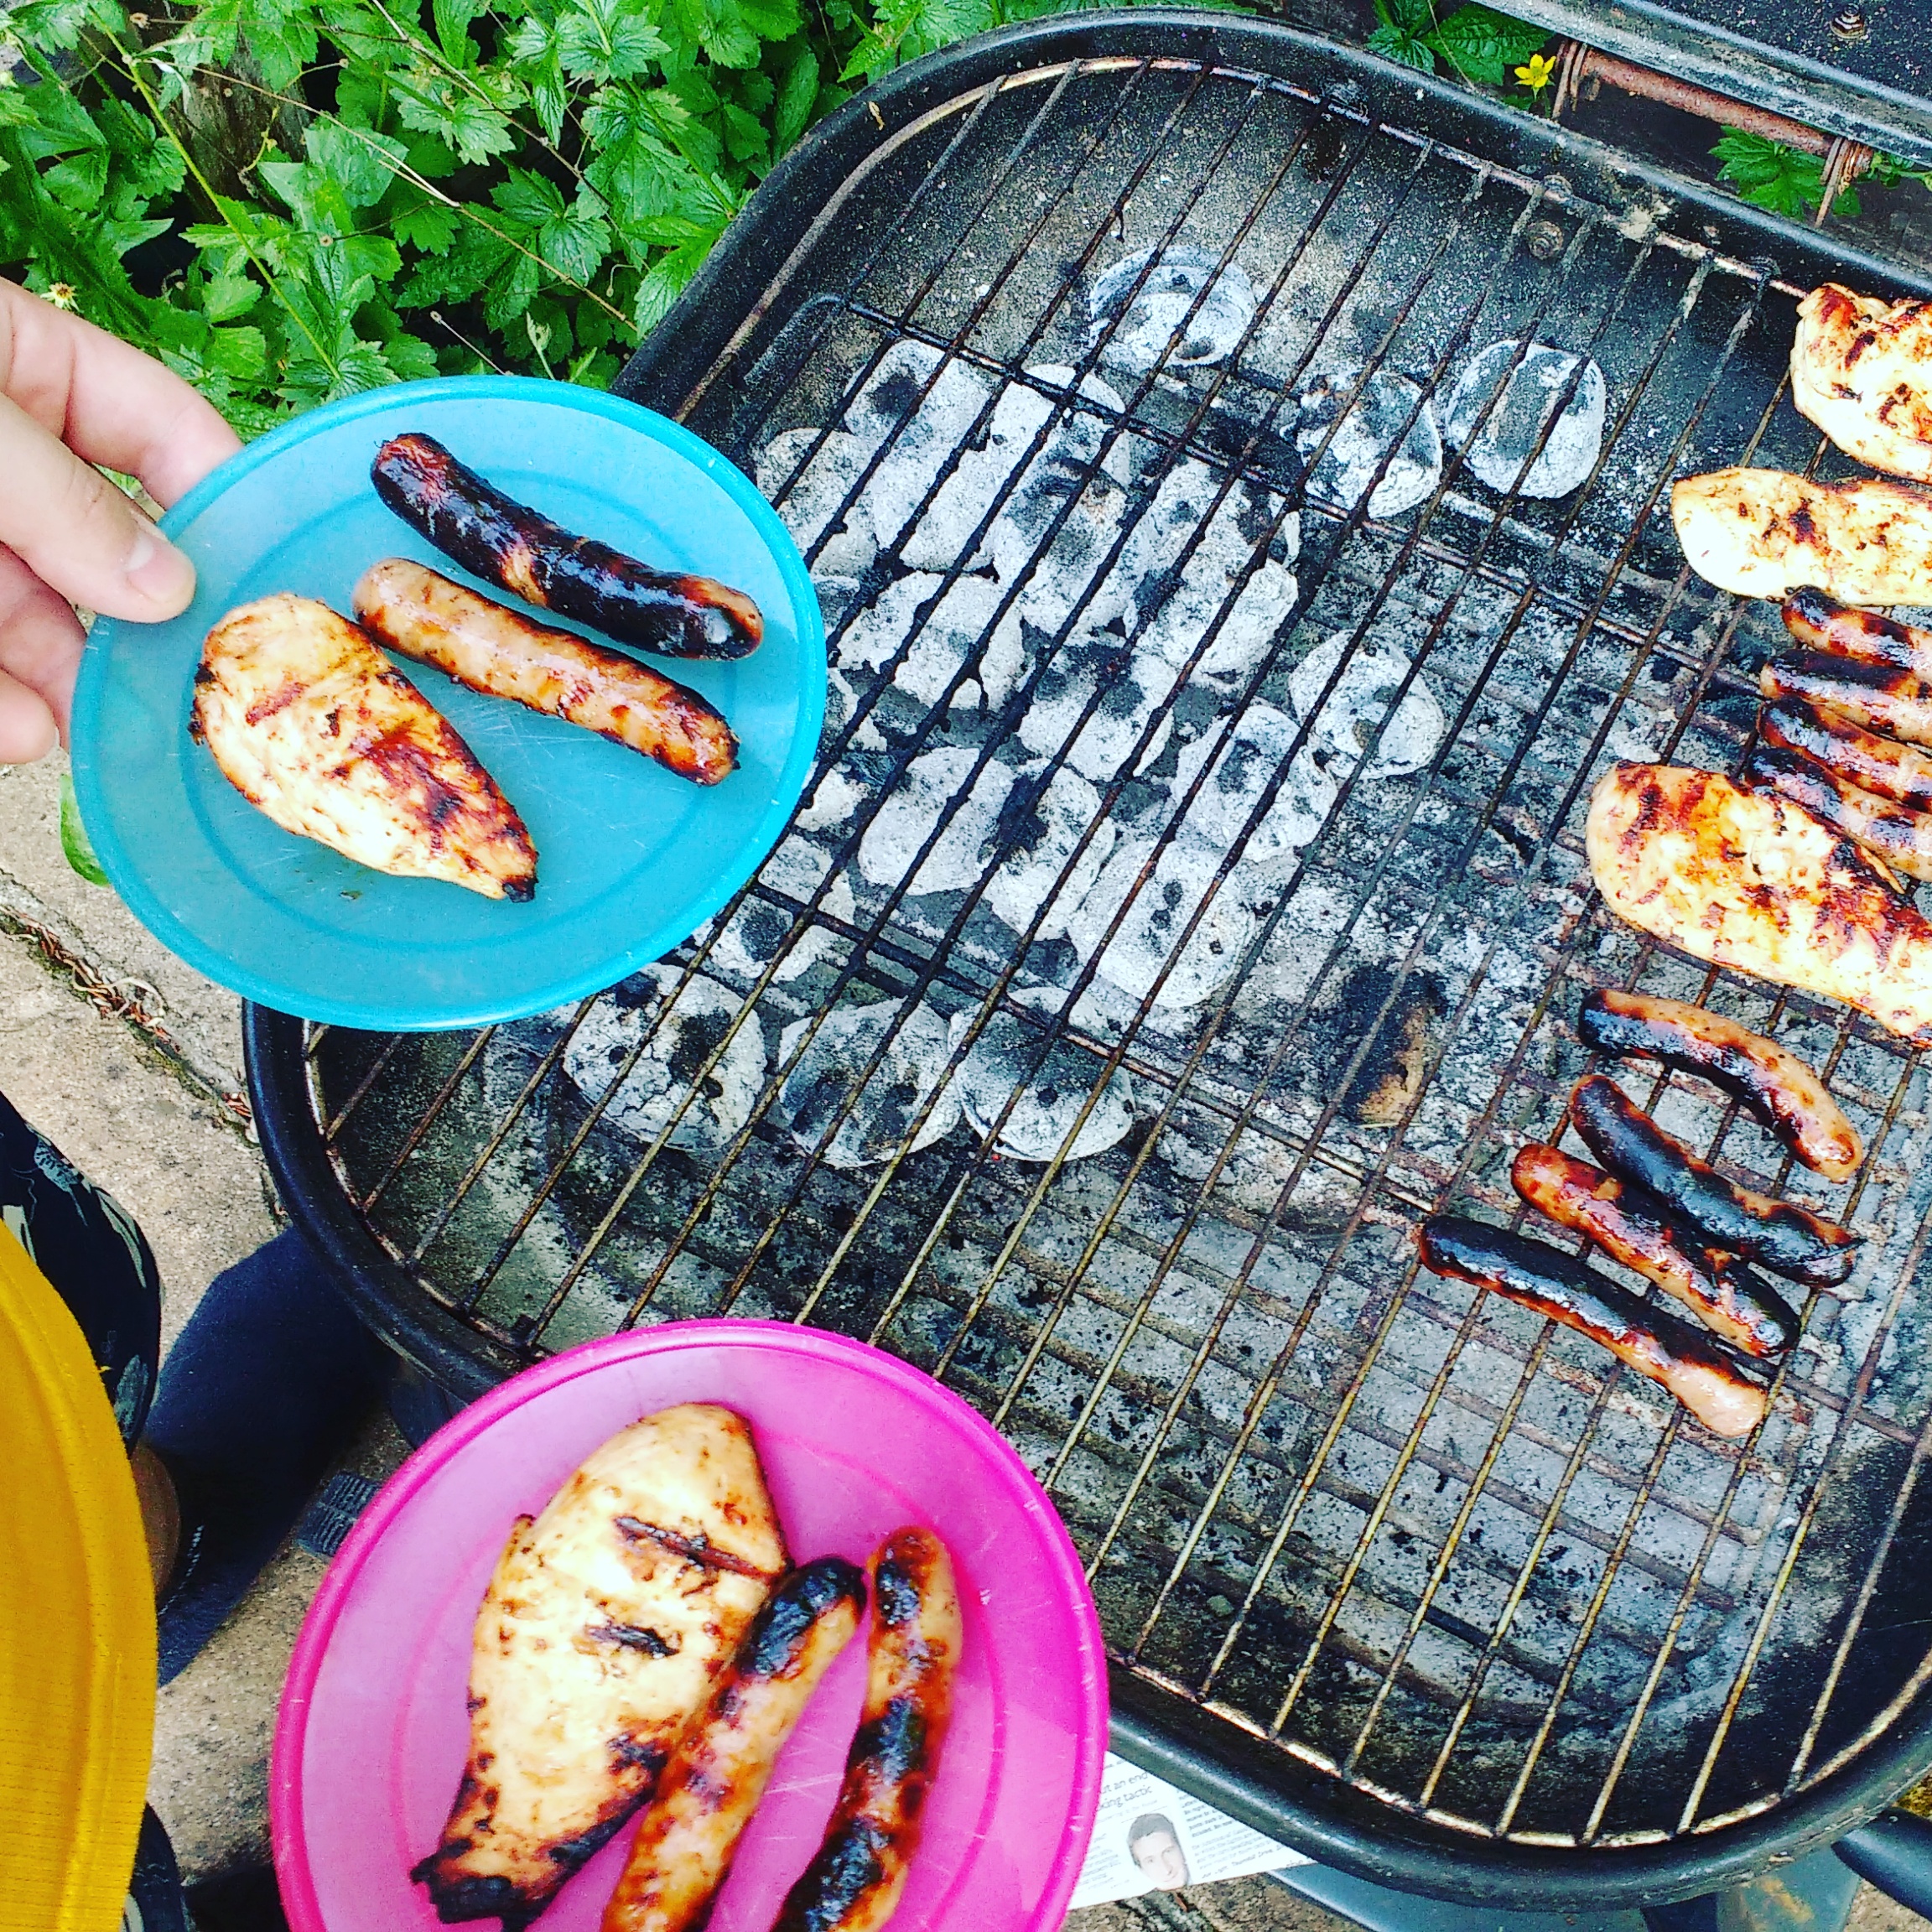 Barbeque charred food - kids' party ideas